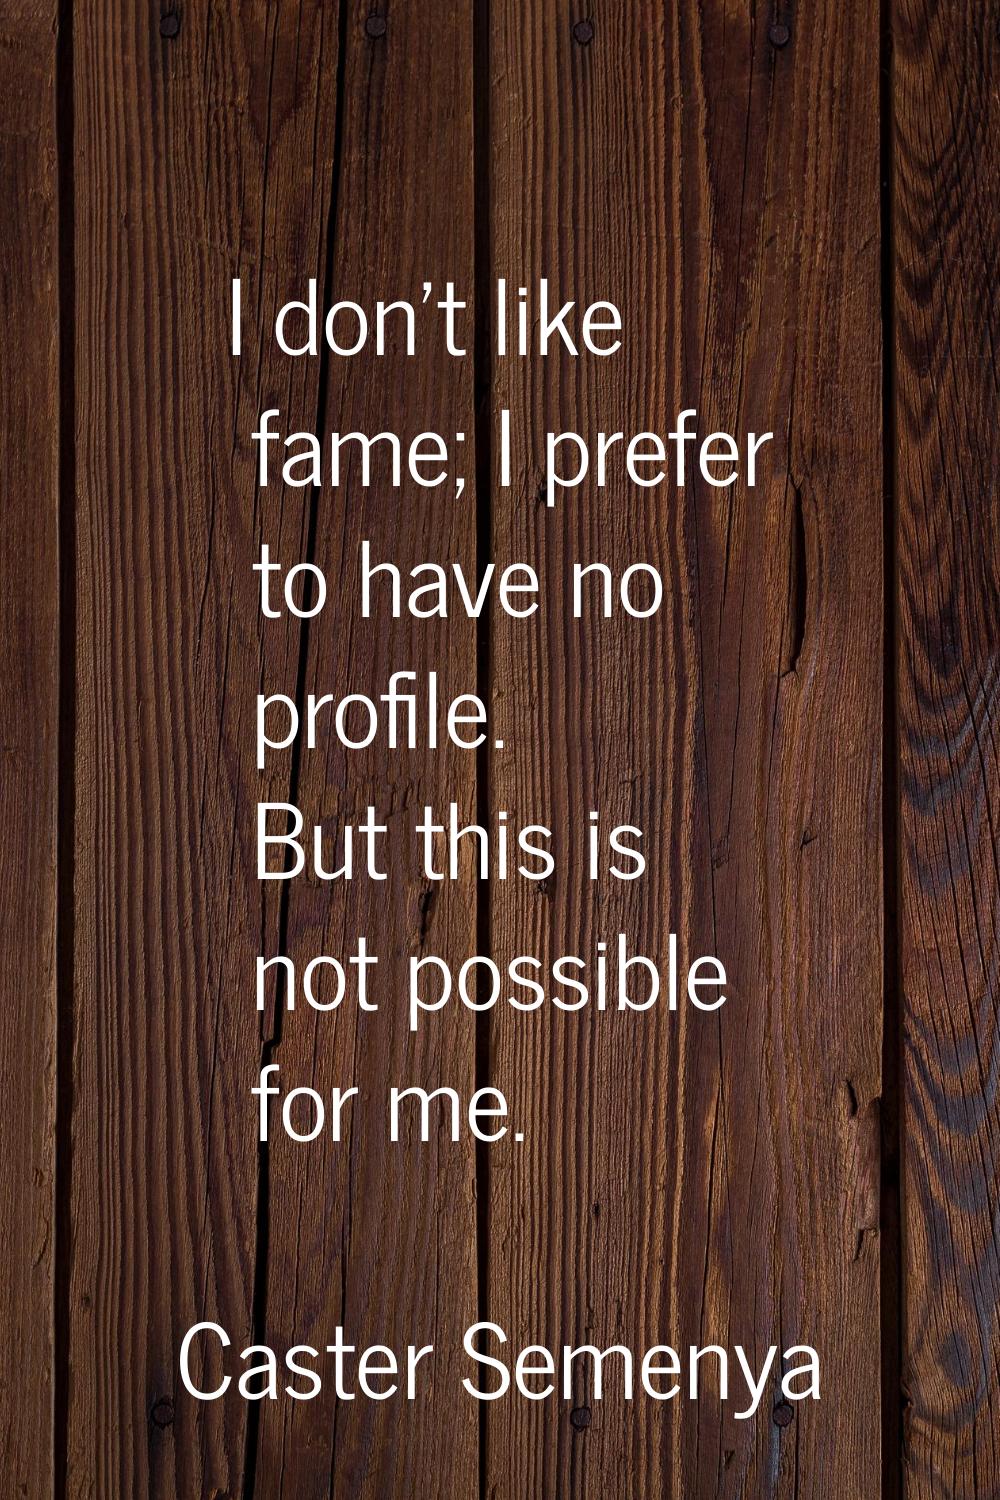 I don't like fame; I prefer to have no profile. But this is not possible for me.